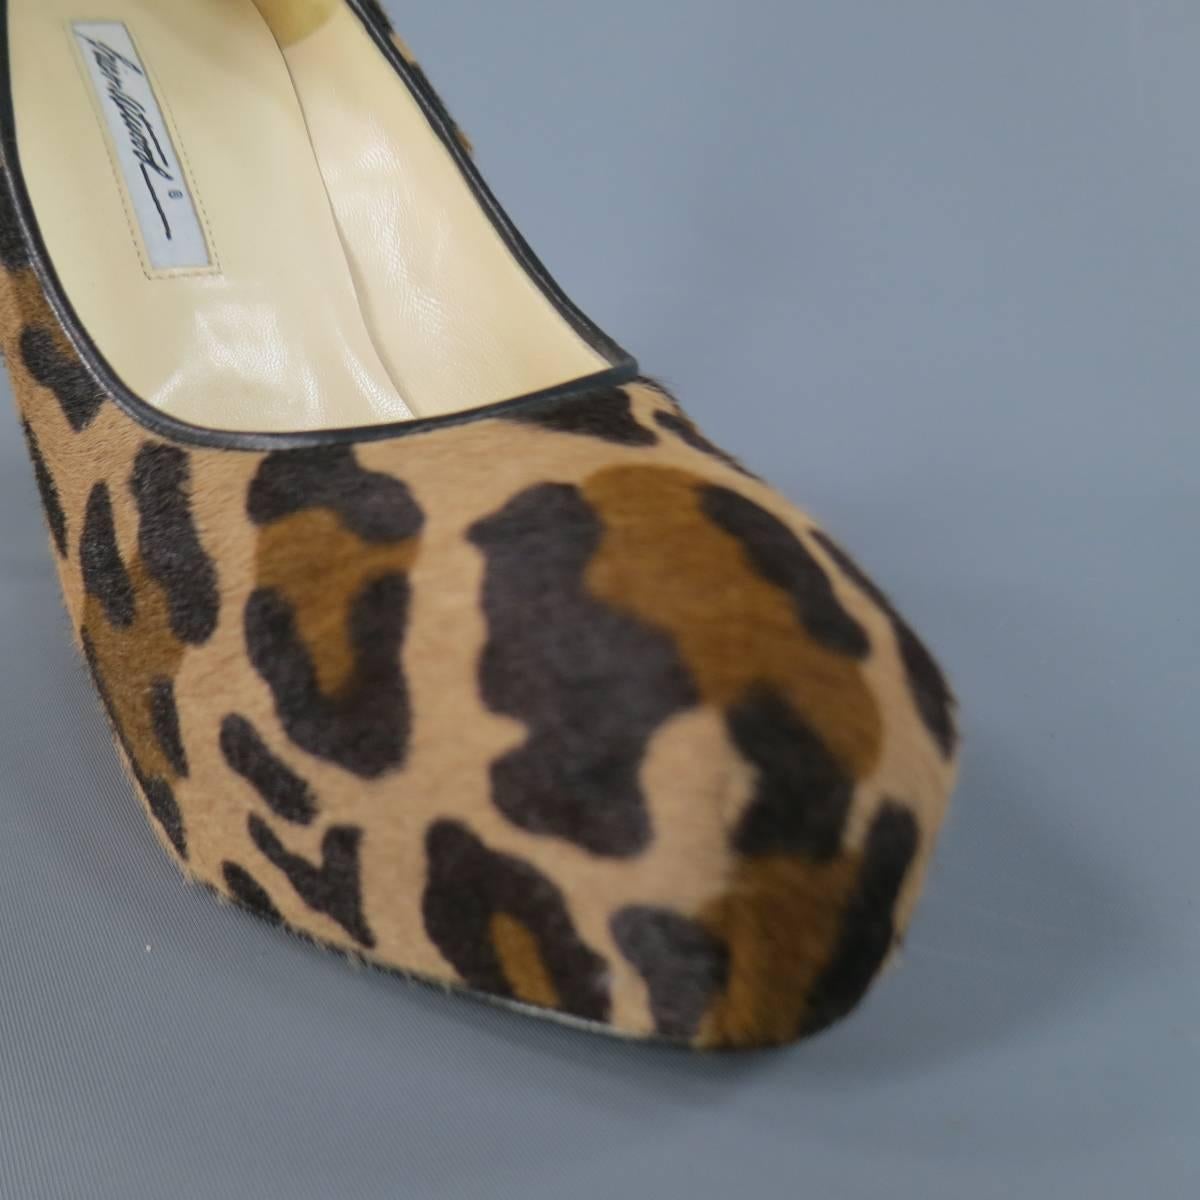 These fabulous BIAN ATWOOD pumps come in beige and brown leaoprad cheetah print pony hair leather and feature a concealed platform black piping and gorgeous silver tone chain detail down the heel. Made in Italy.
 
Excellent Pre-Owned